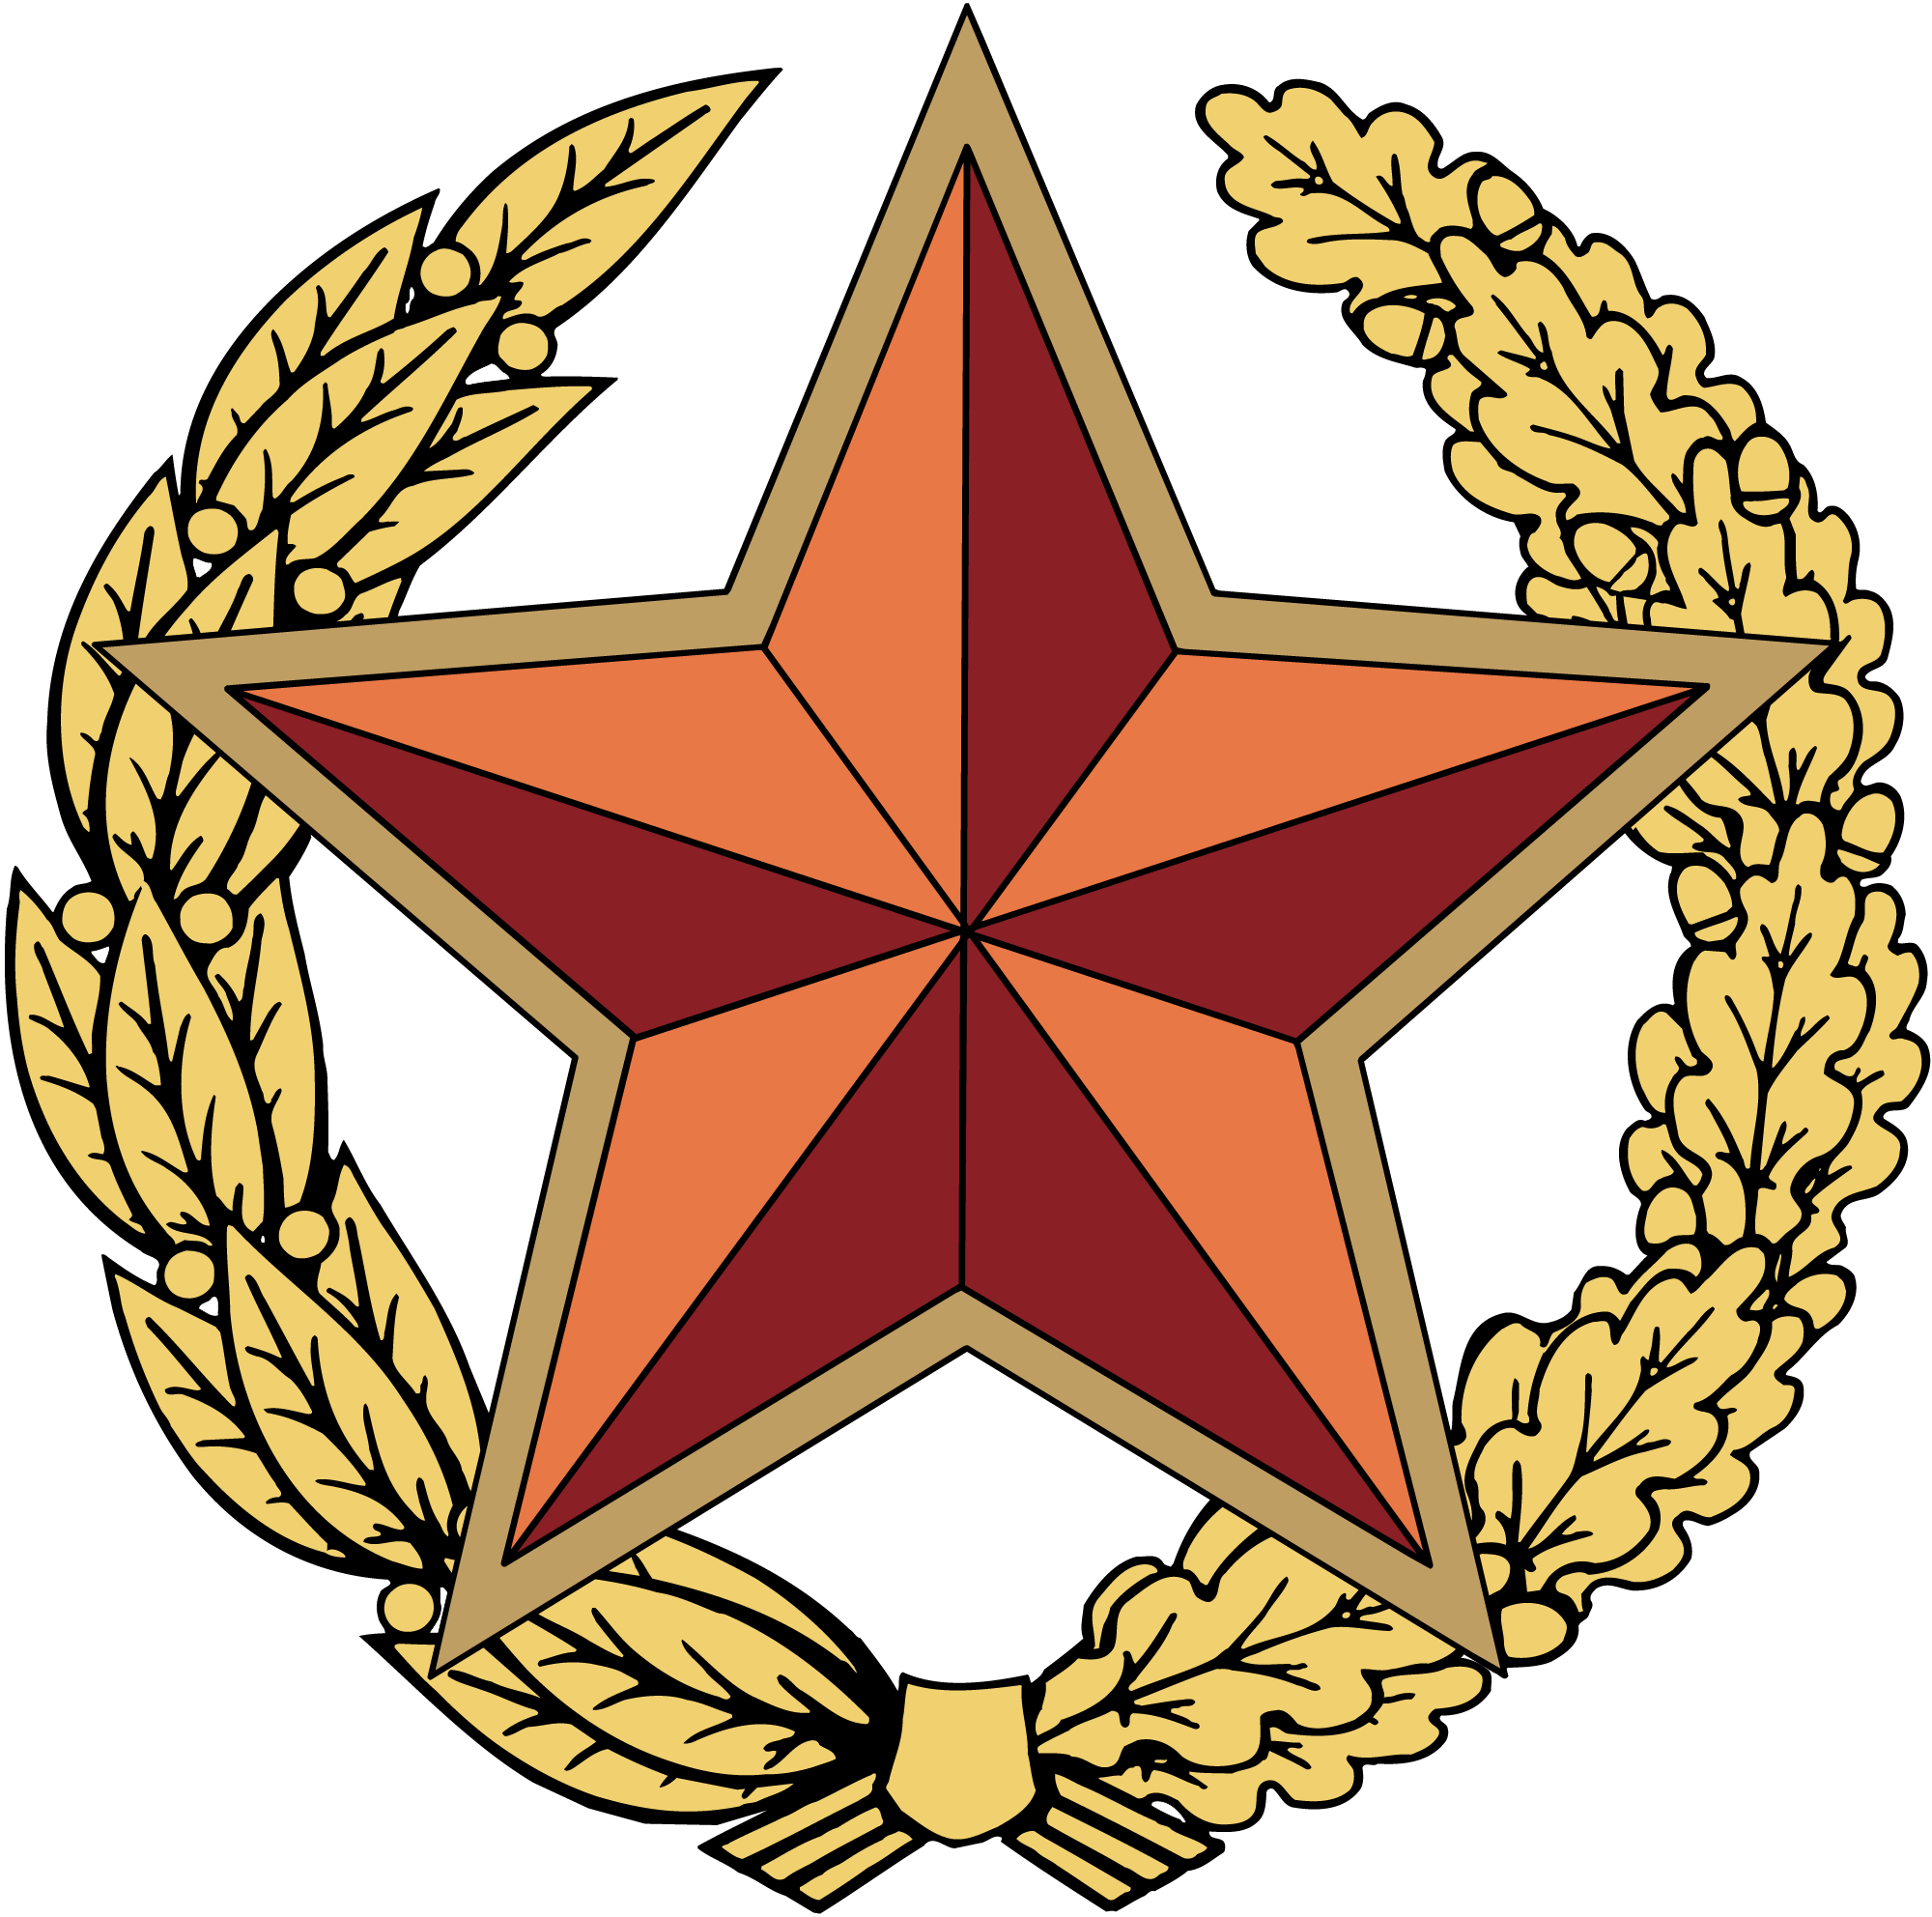 The Emblem Of The Armed Forces Of The Republic Of Belarus - Armed Forces Emblem (2000x1984)